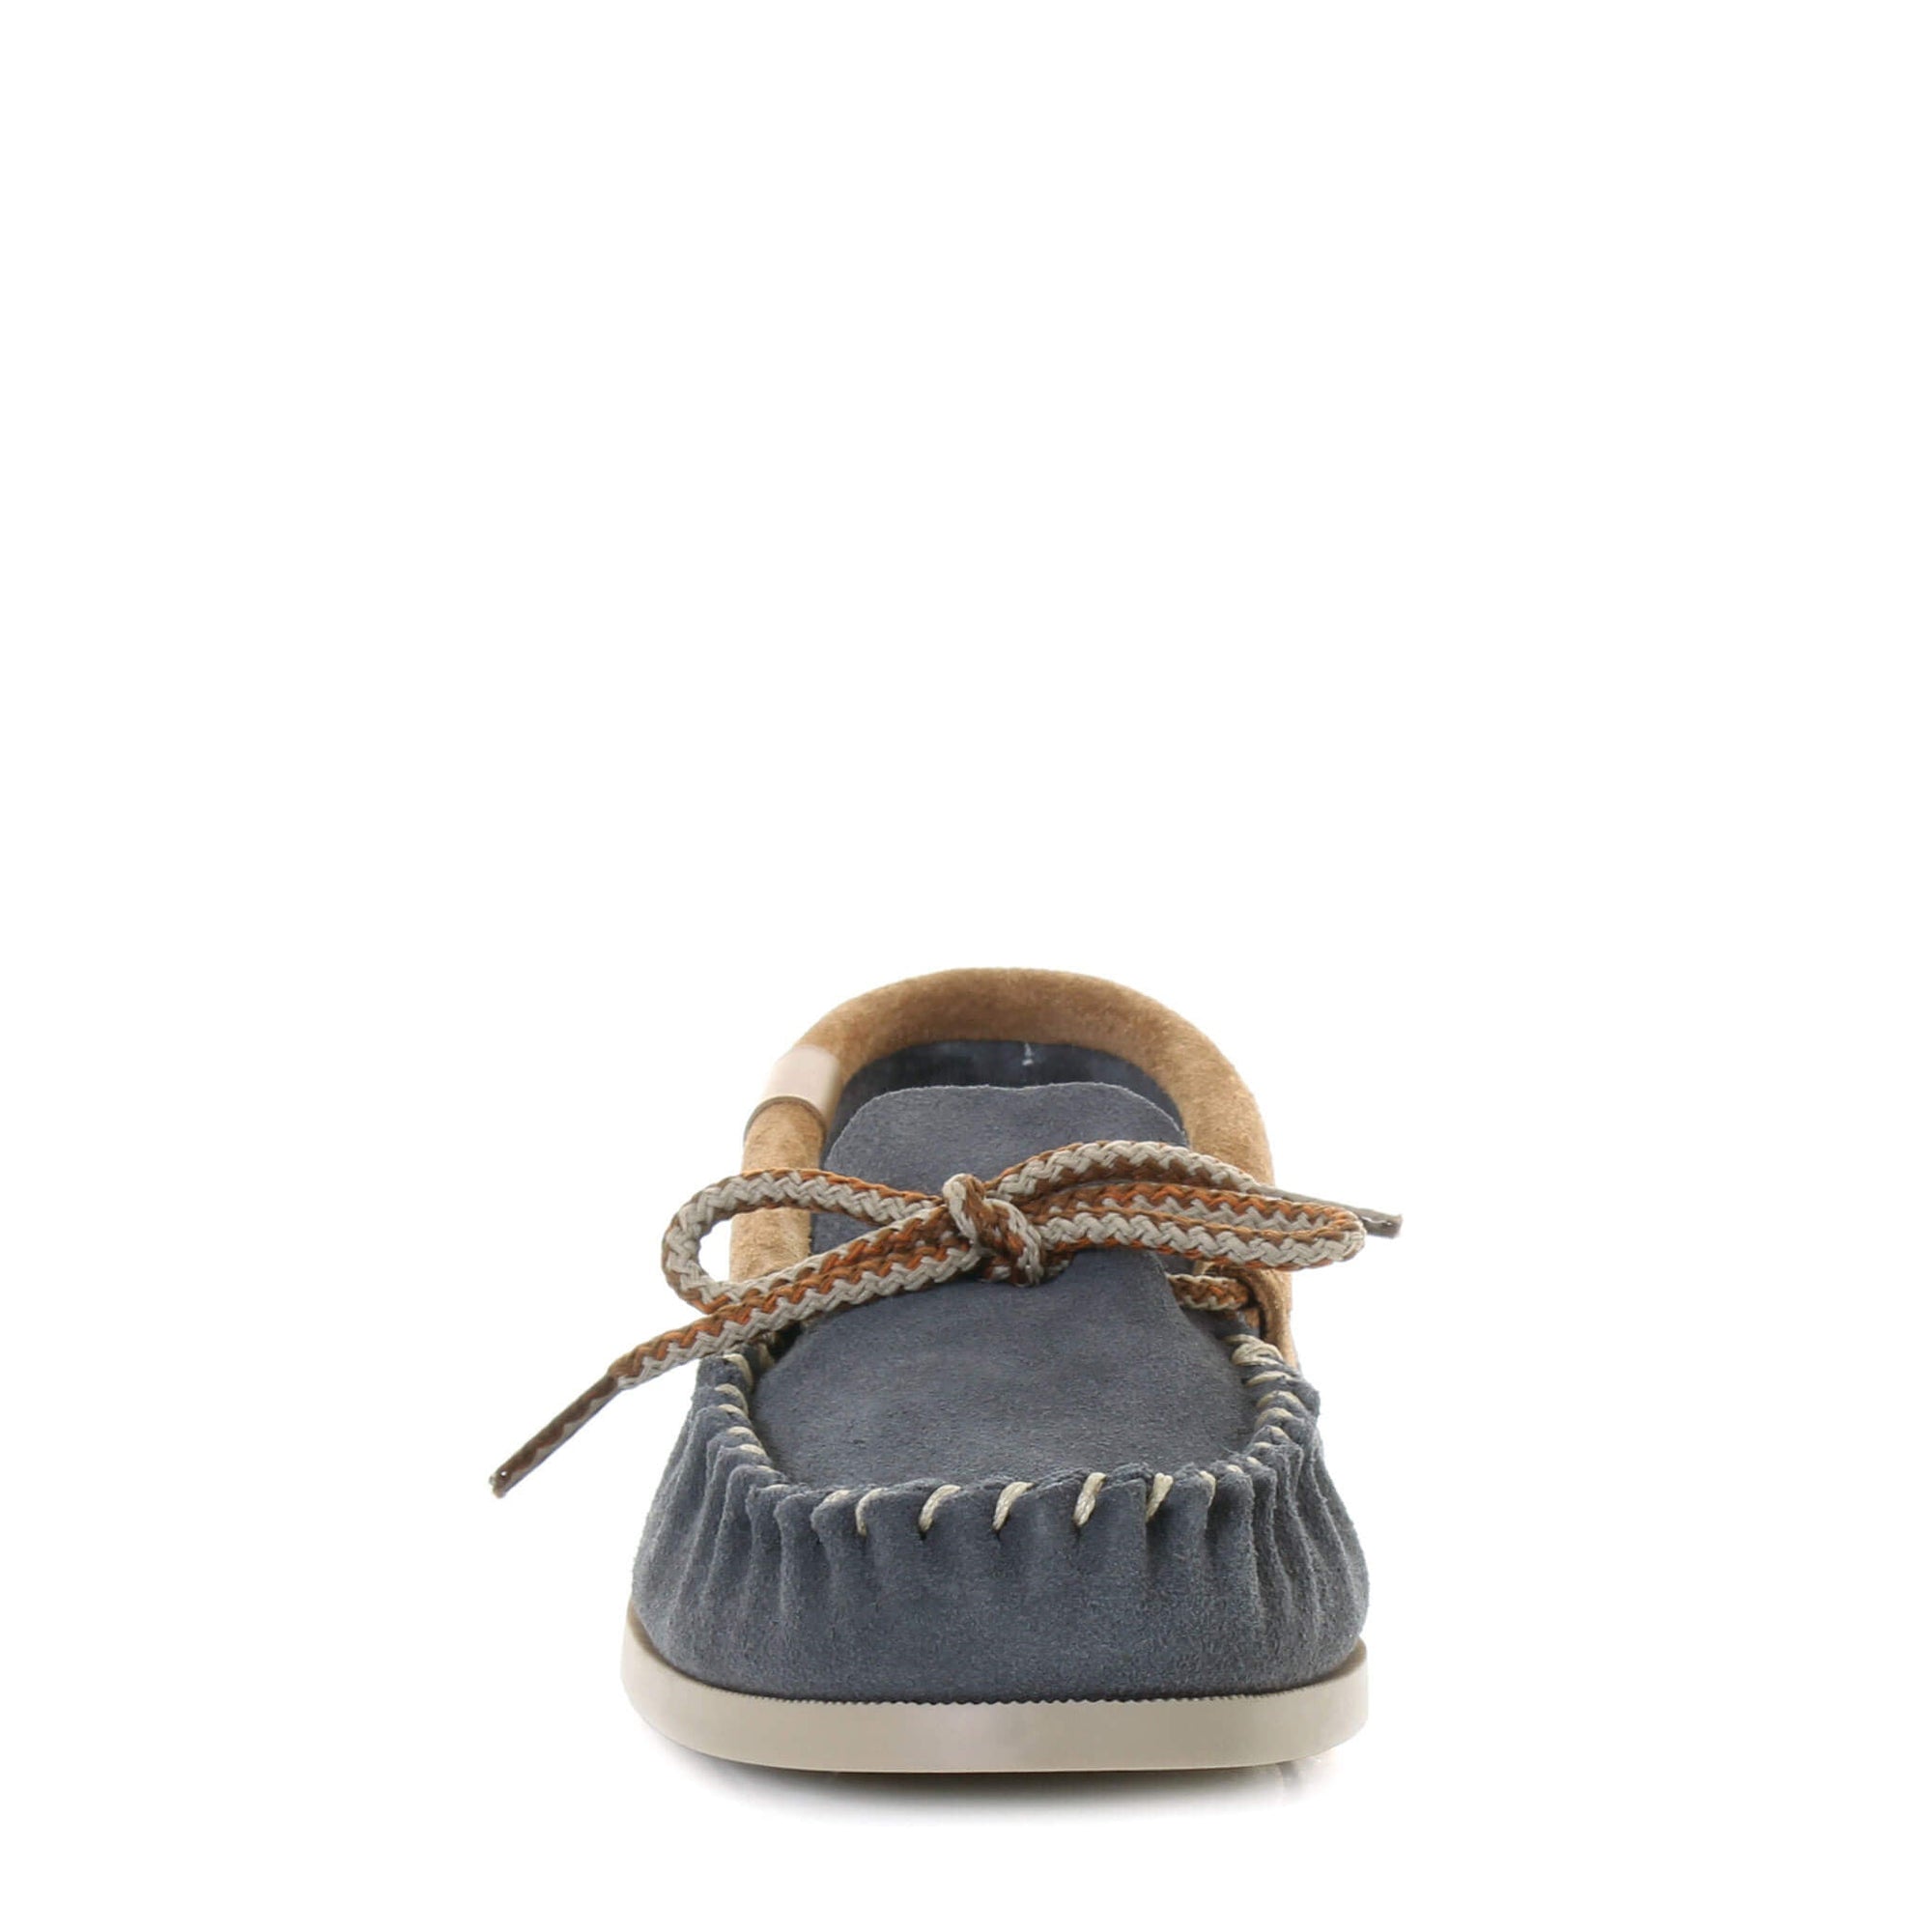 Canada Mocc Grey Moccasin for Women